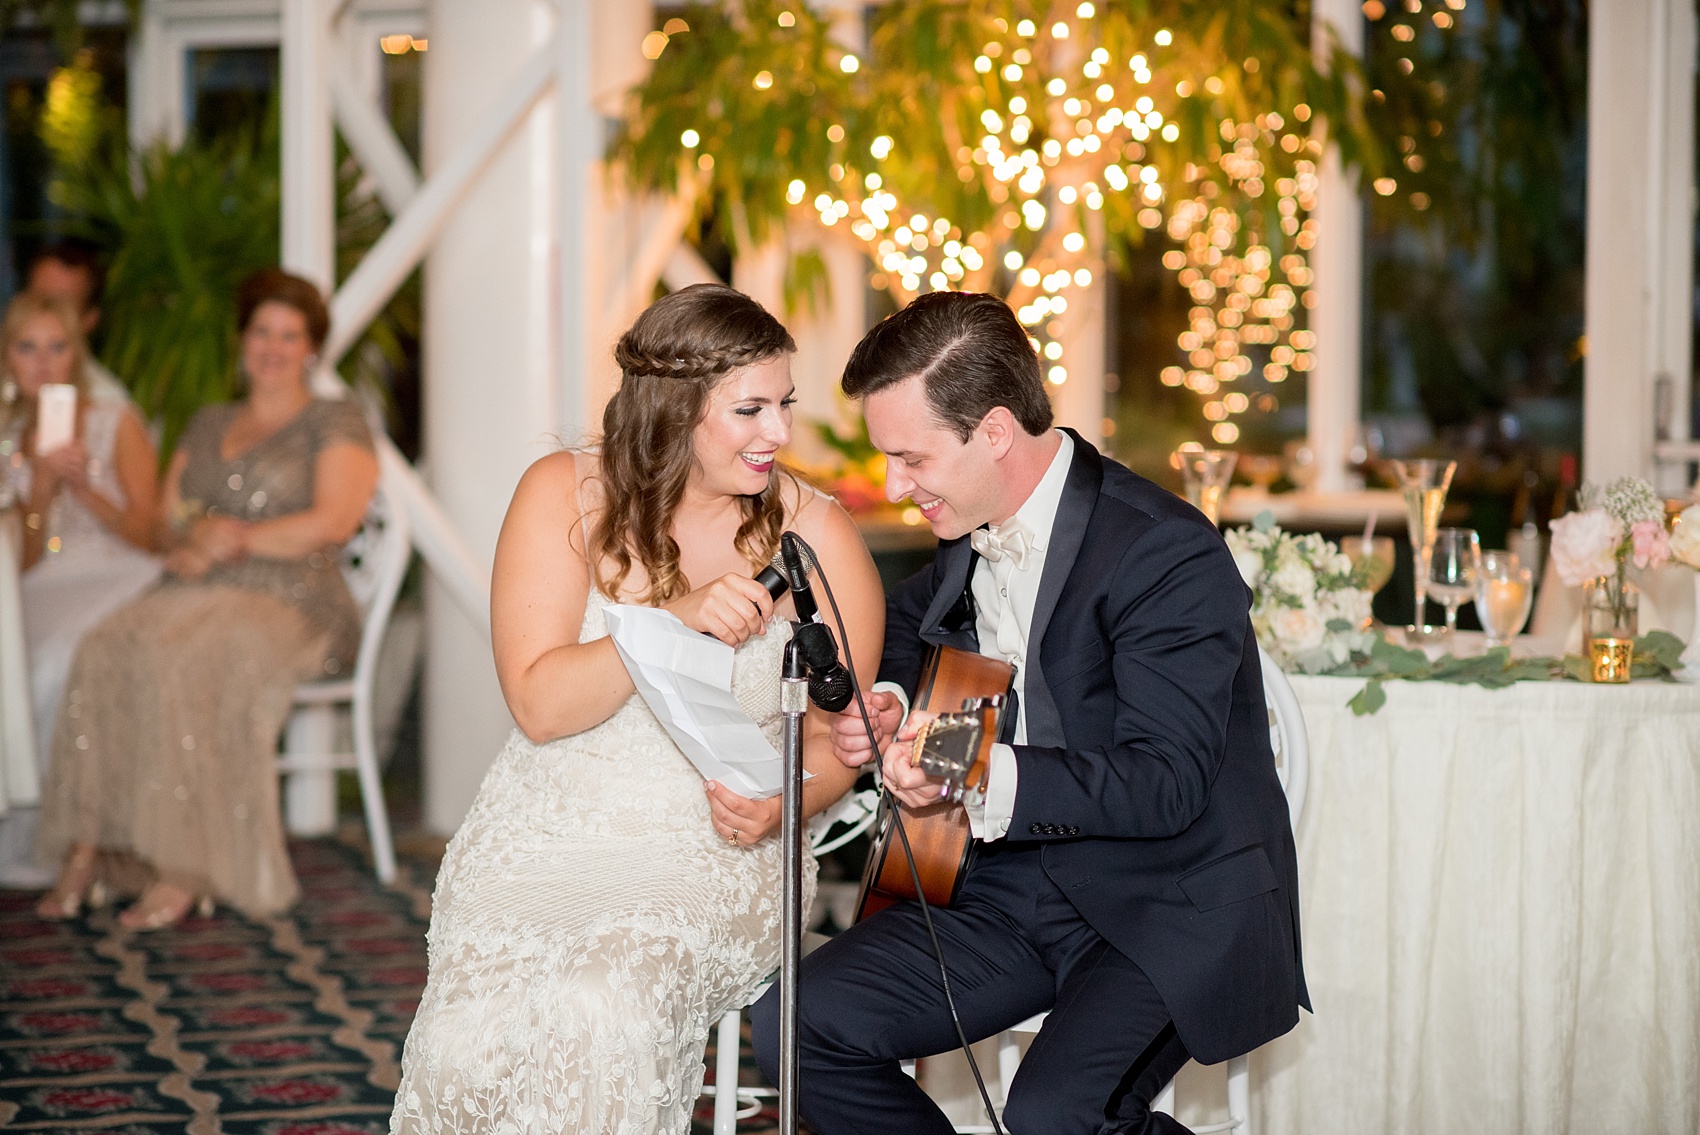 Mikkel Paige Photography photo of a wedding at Madison Hotel in NJ. Reception in The Conservatory with the bride and groom singing a duet.